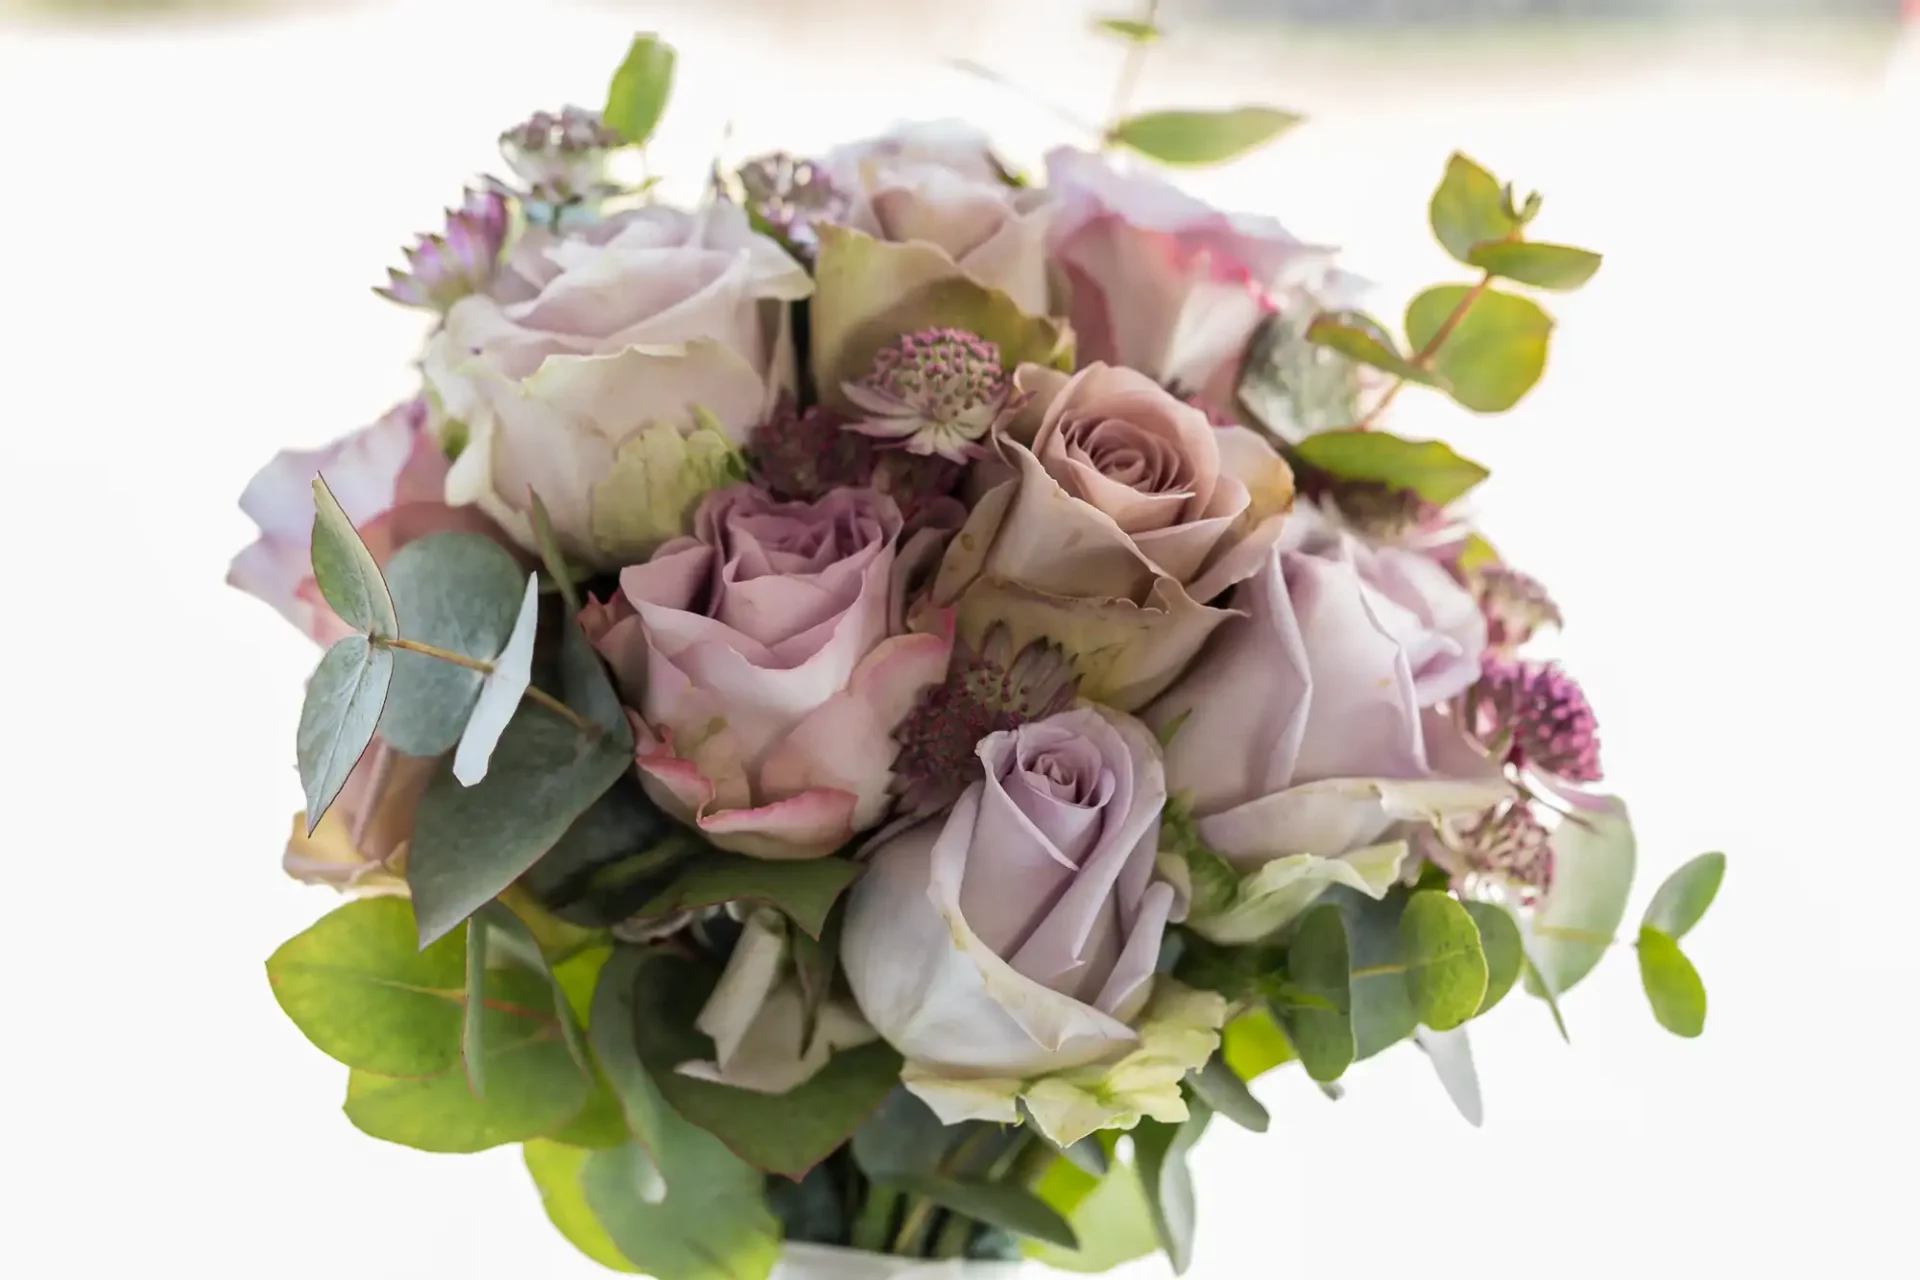 A bouquet of muted pink roses and green foliage on a light background.